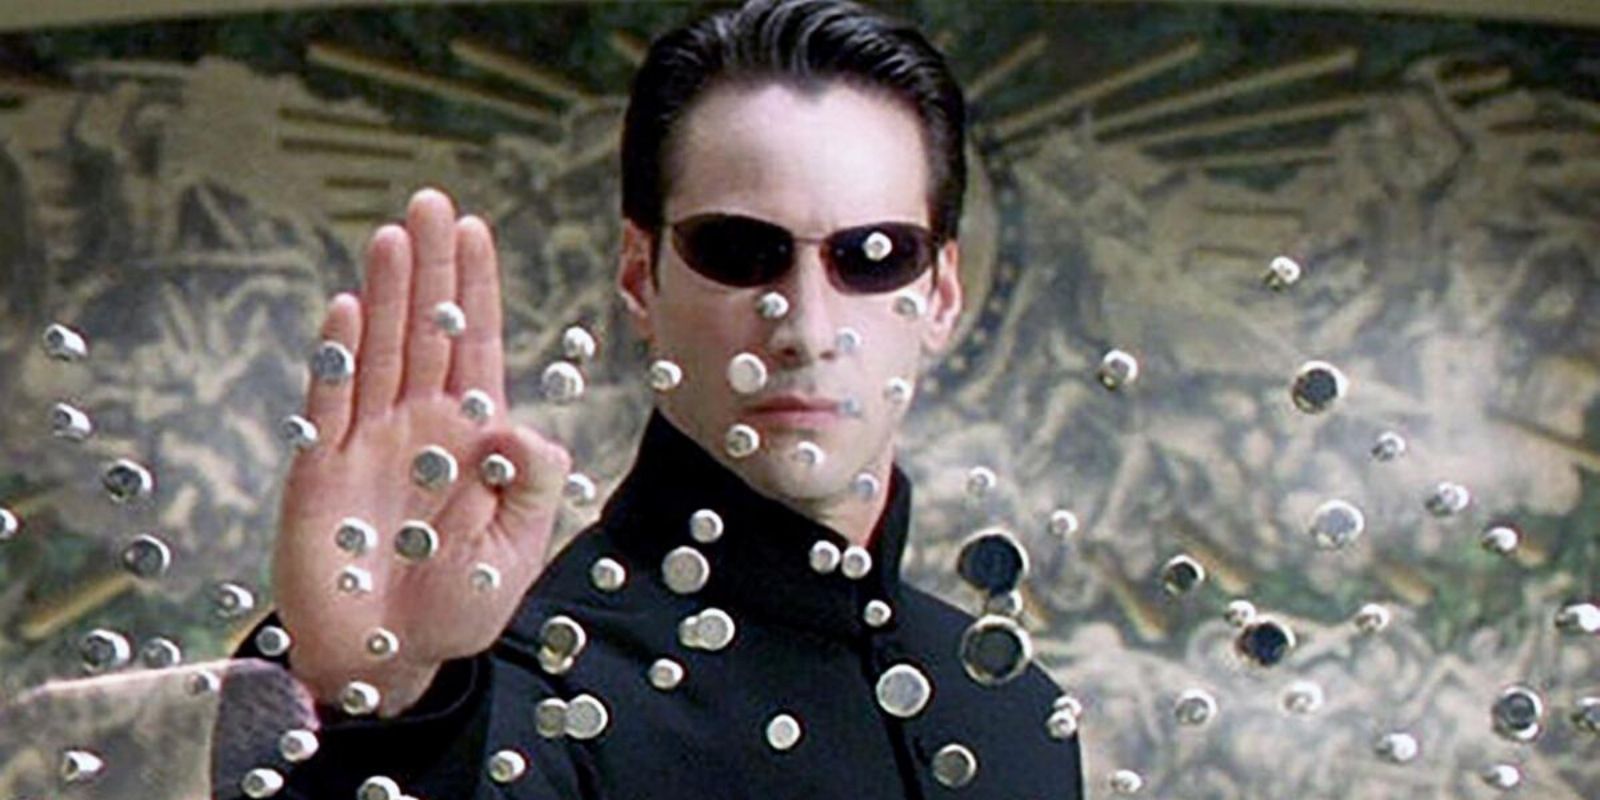 Neo from Matrix played by Keanu Reeves